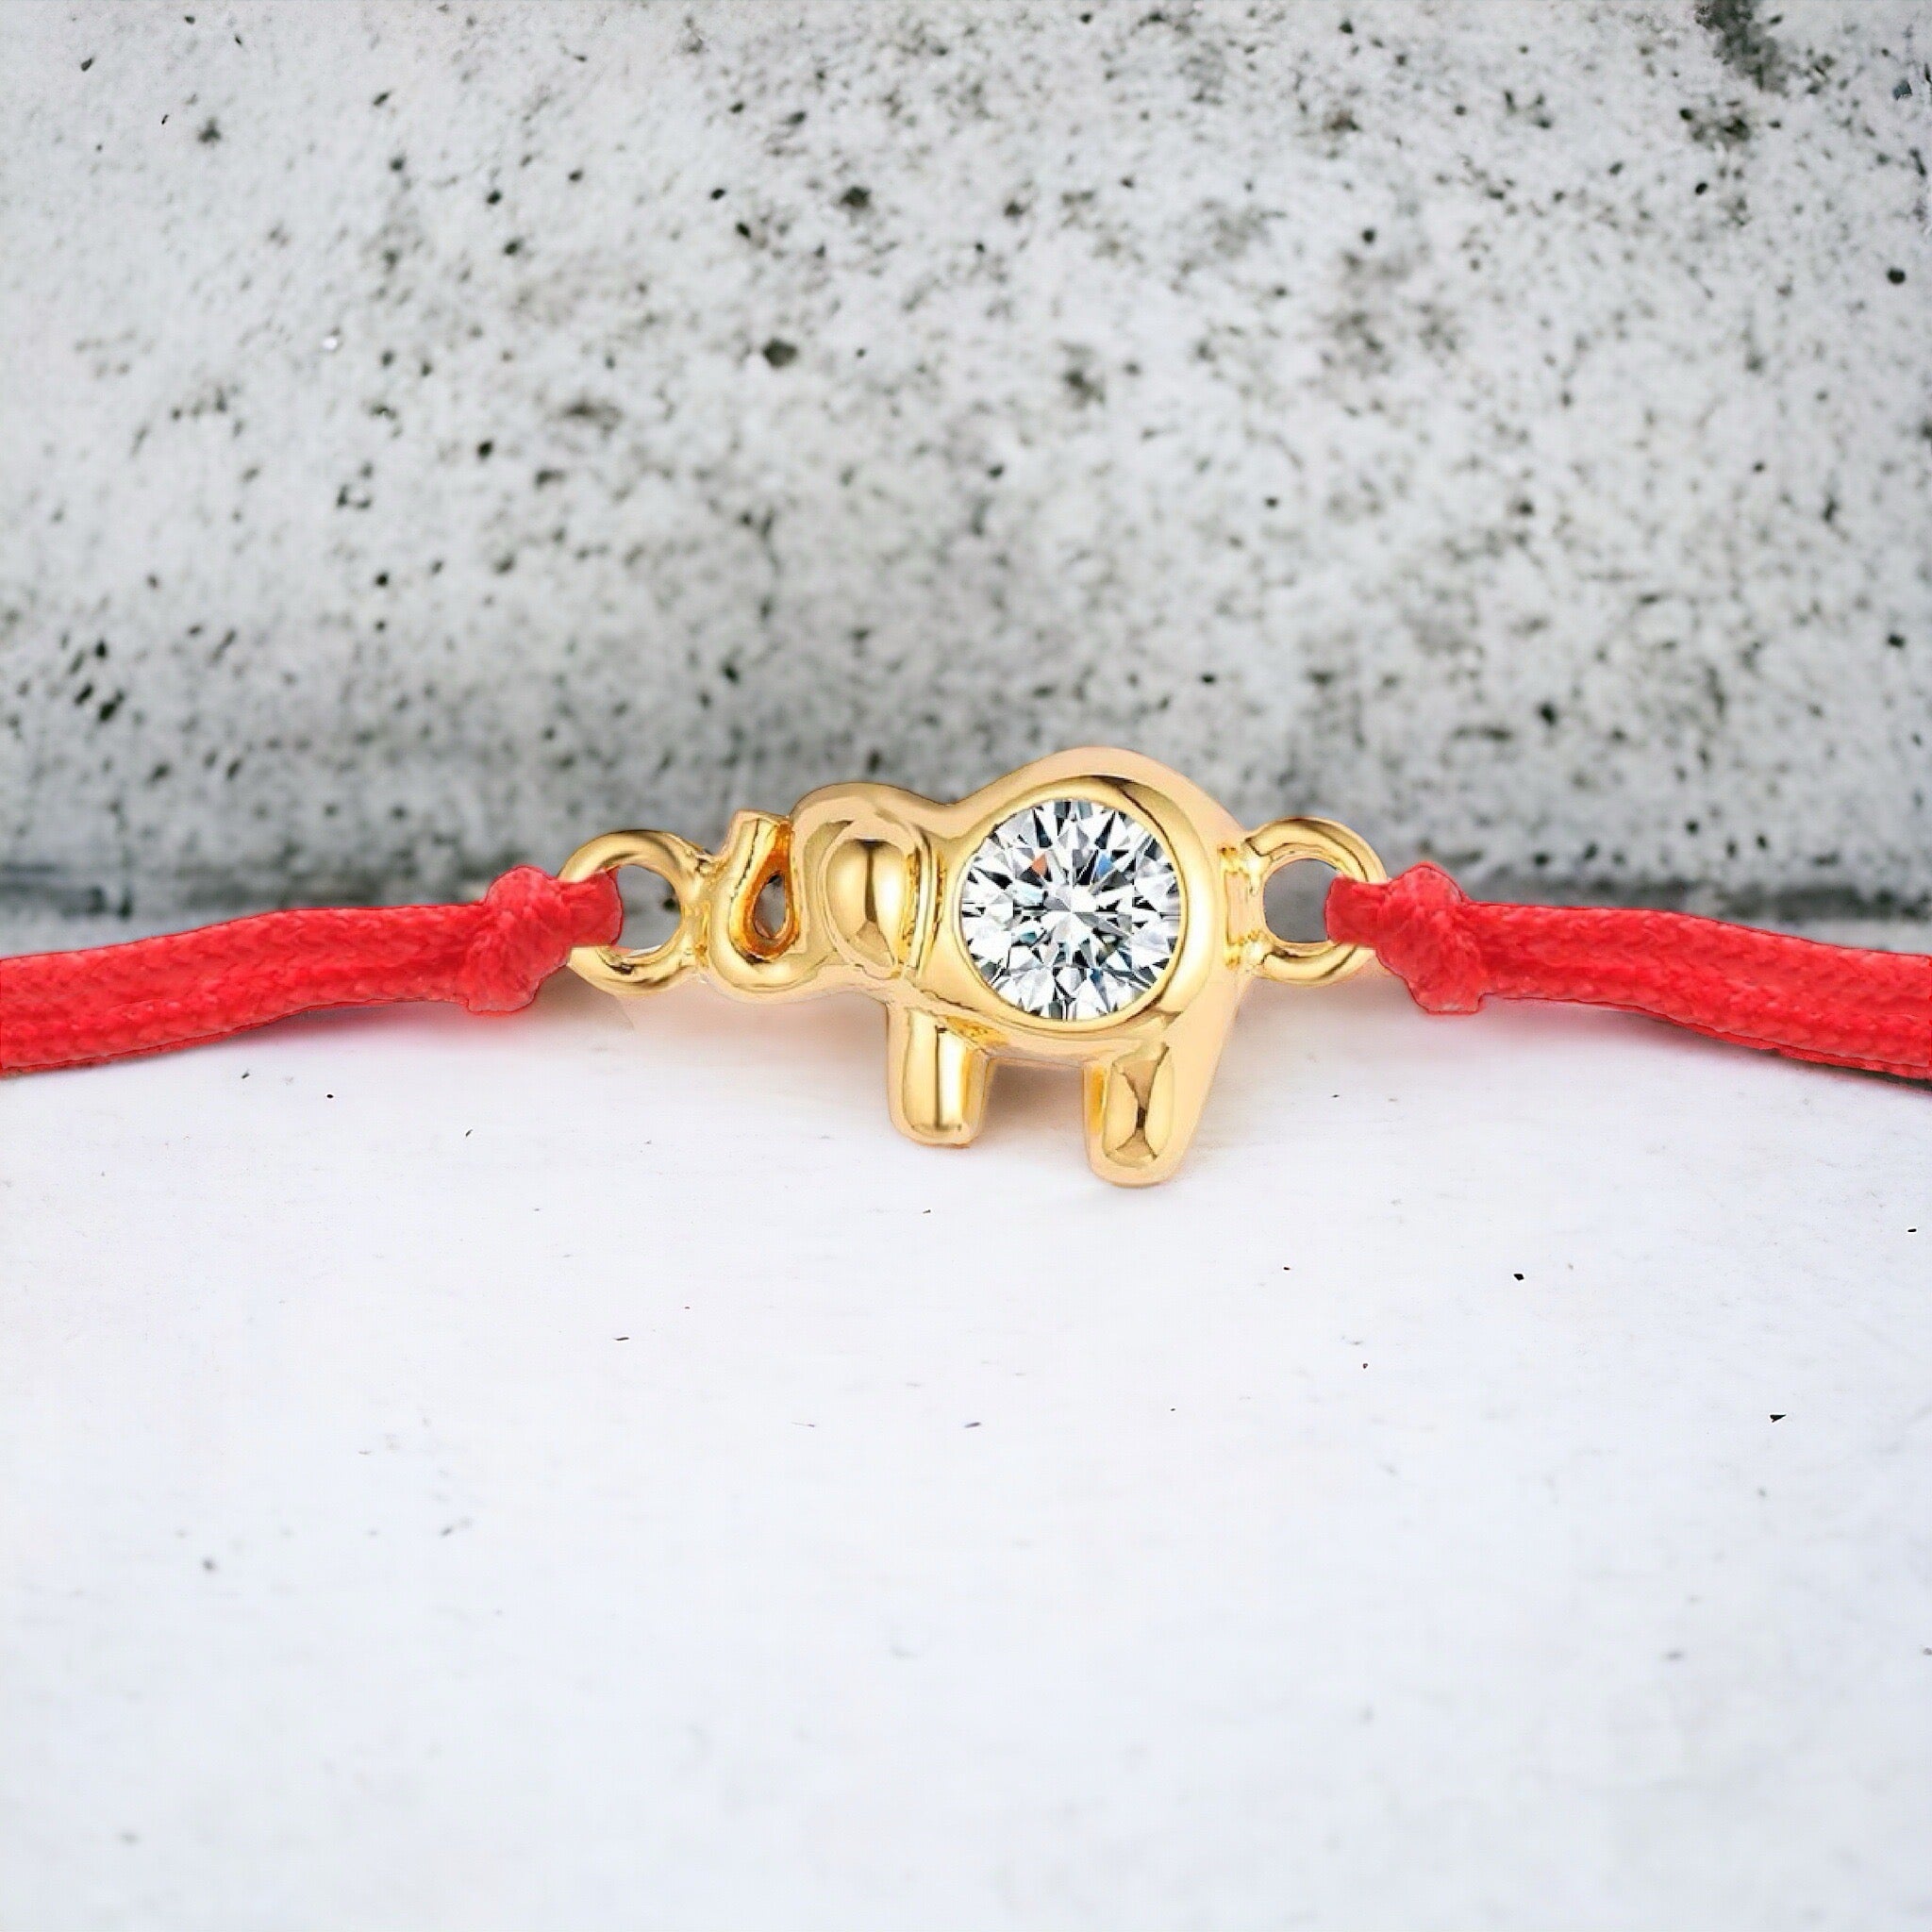 Little Gold Elephant Charm Red String Protection Bracelet - My Harmony Tree